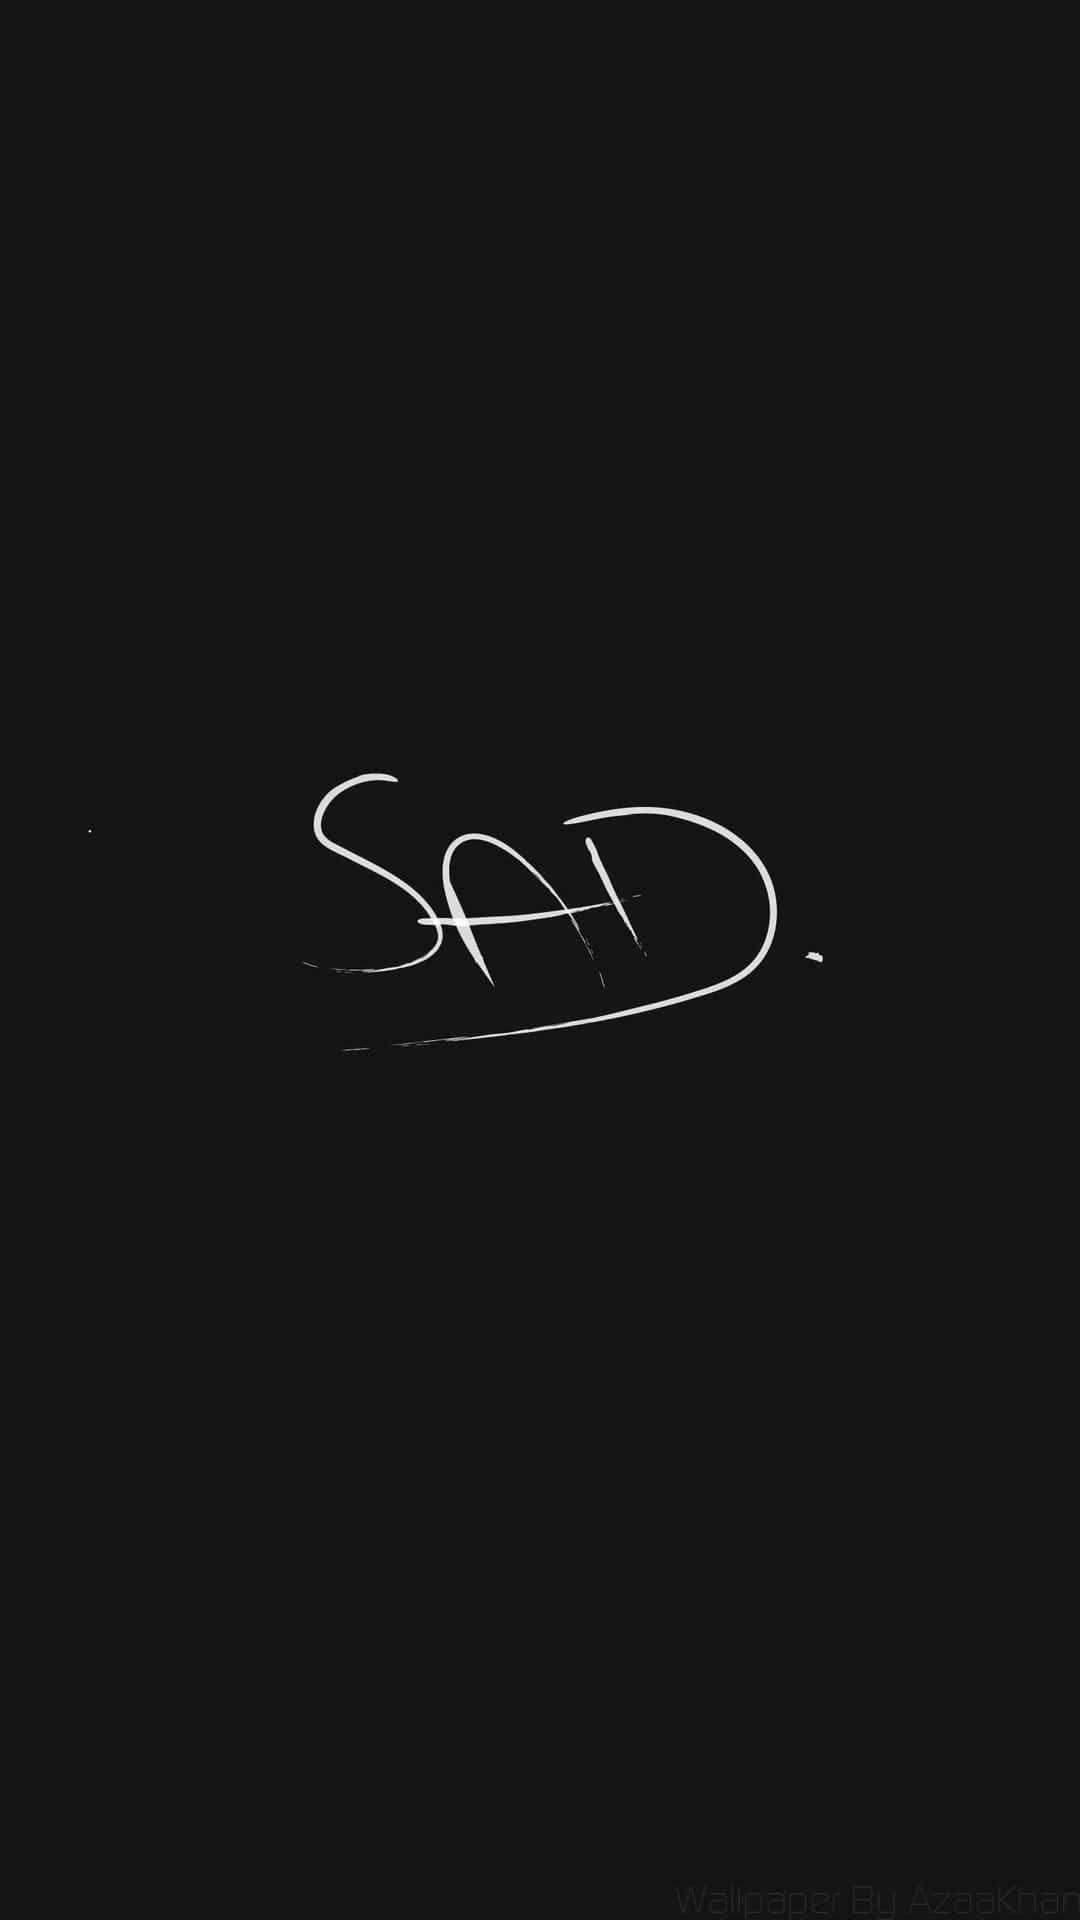 Download Sad Wallpapers For Your Phone Wallpaper | Wallpapers.com